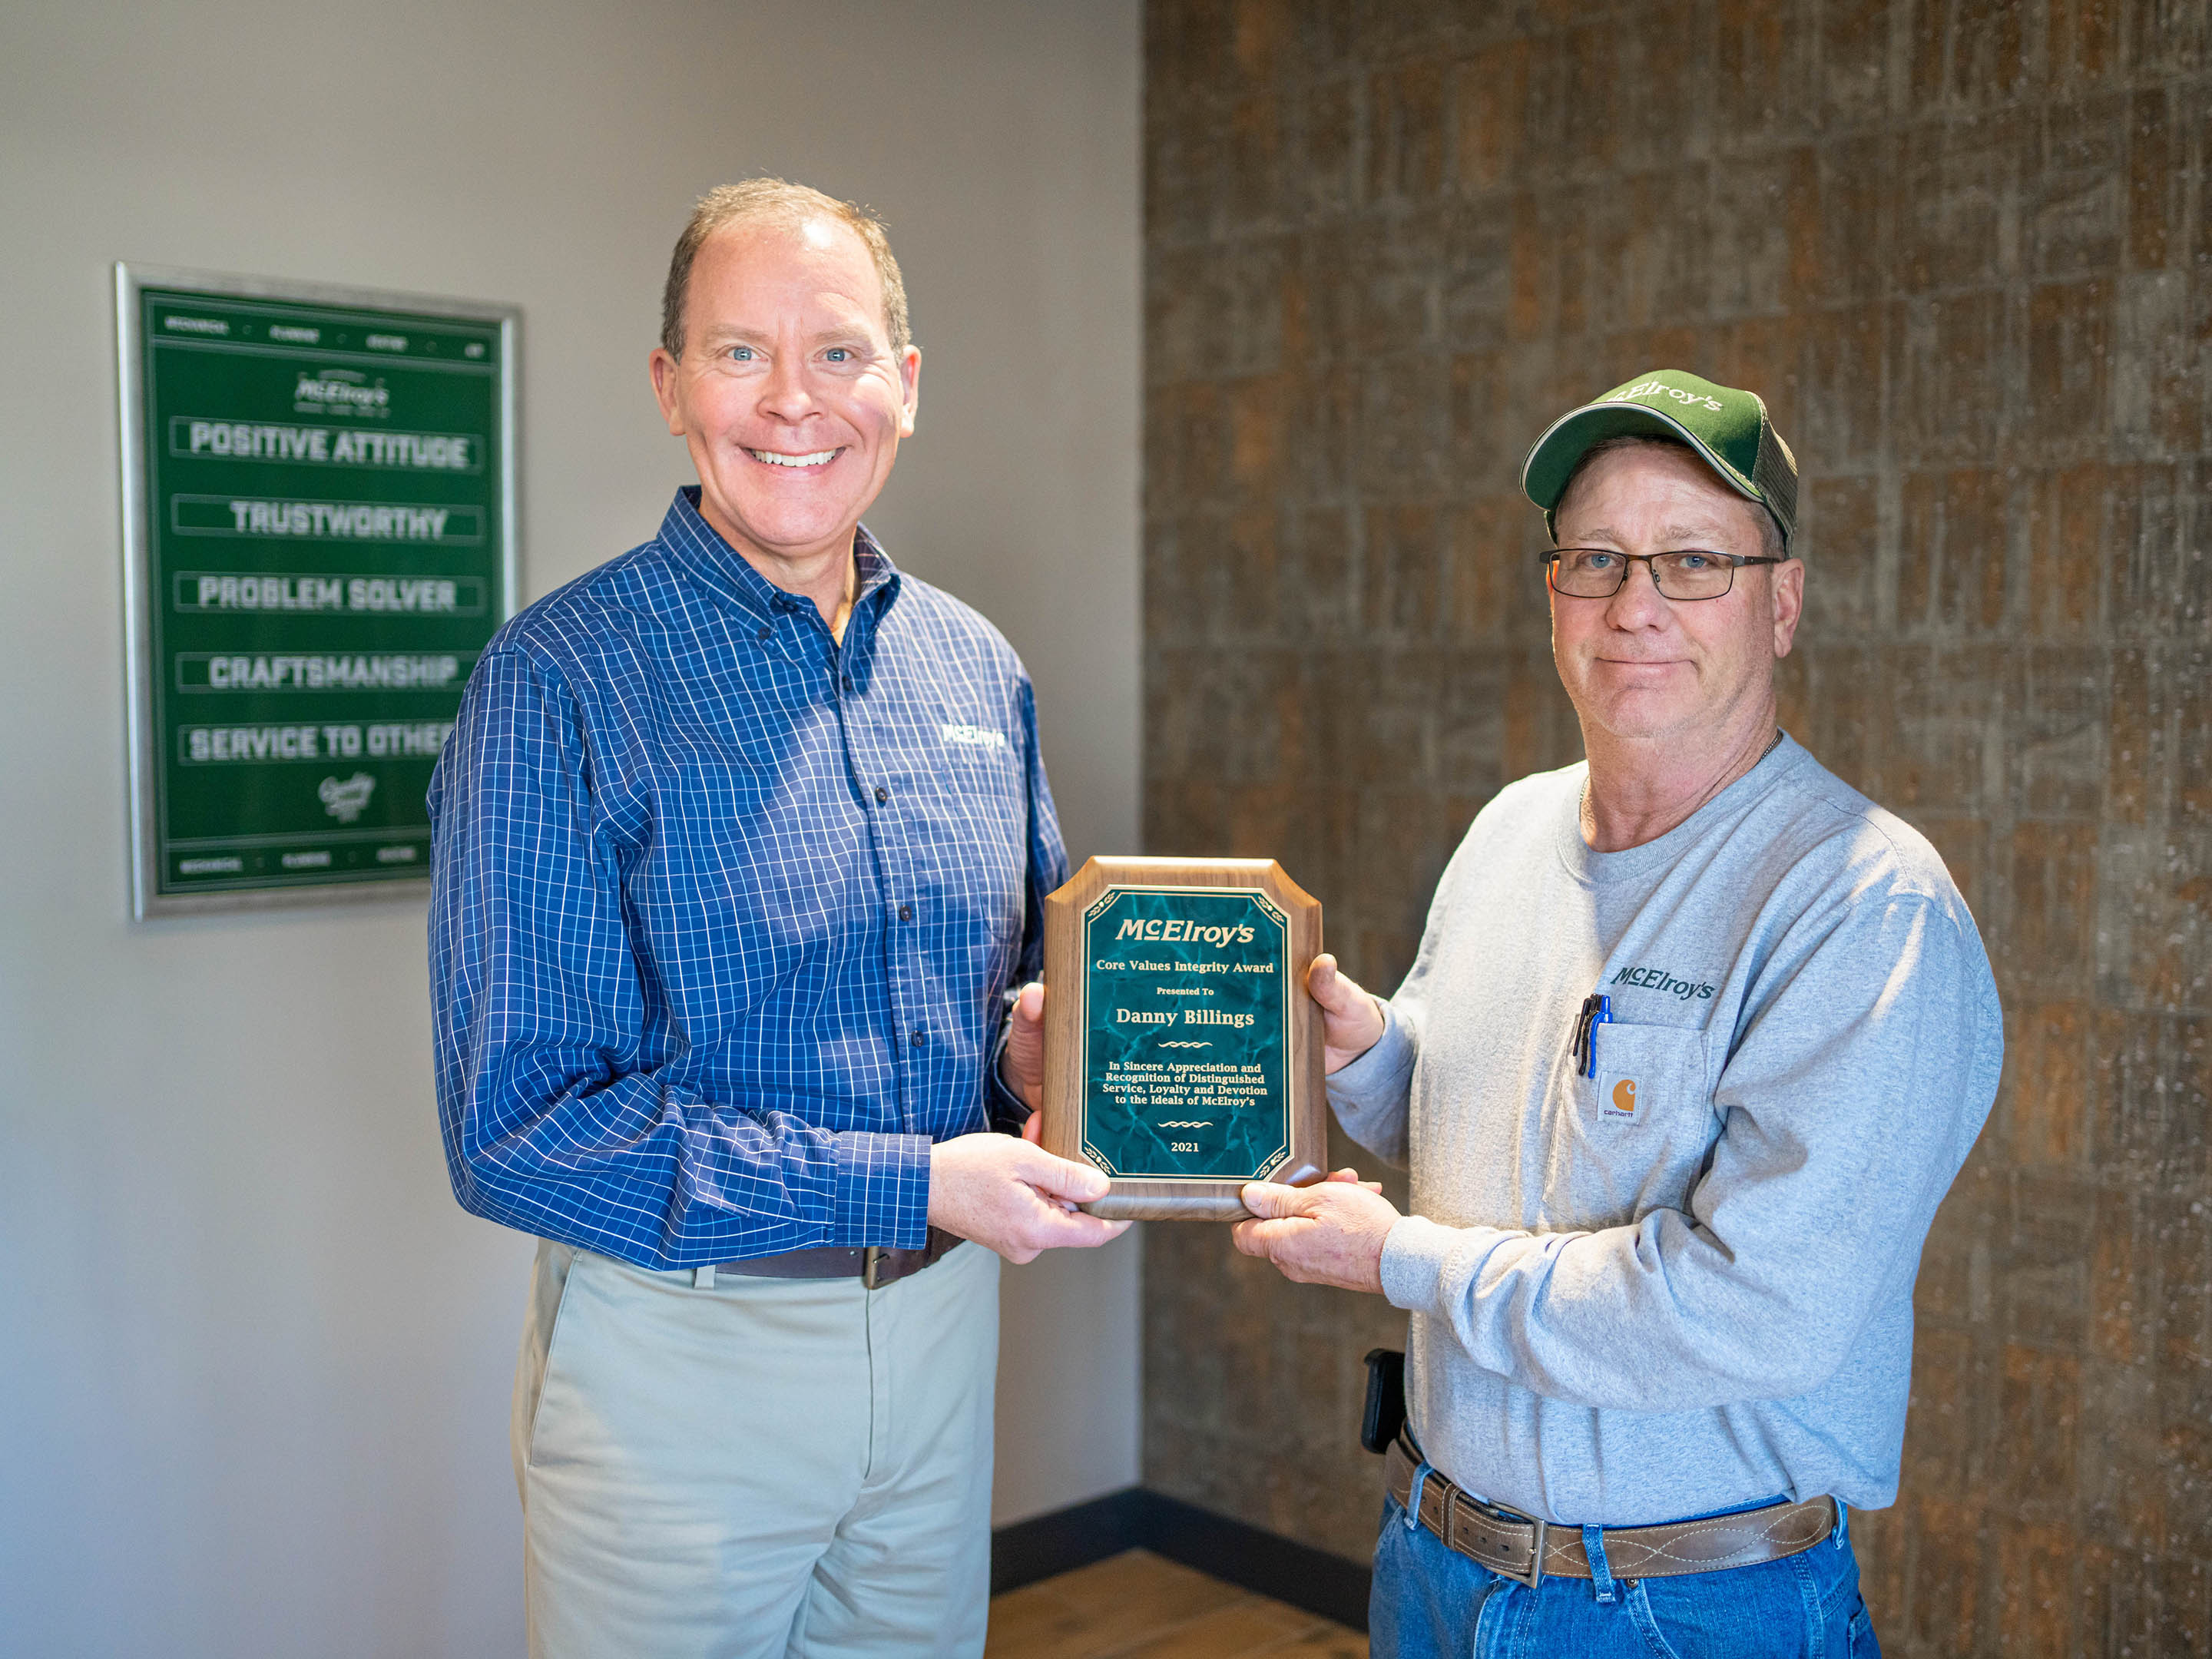 McElroy’s president Dan Beal presents the 2021 McElroy's Core Values Integrity Award to Danny Billings.